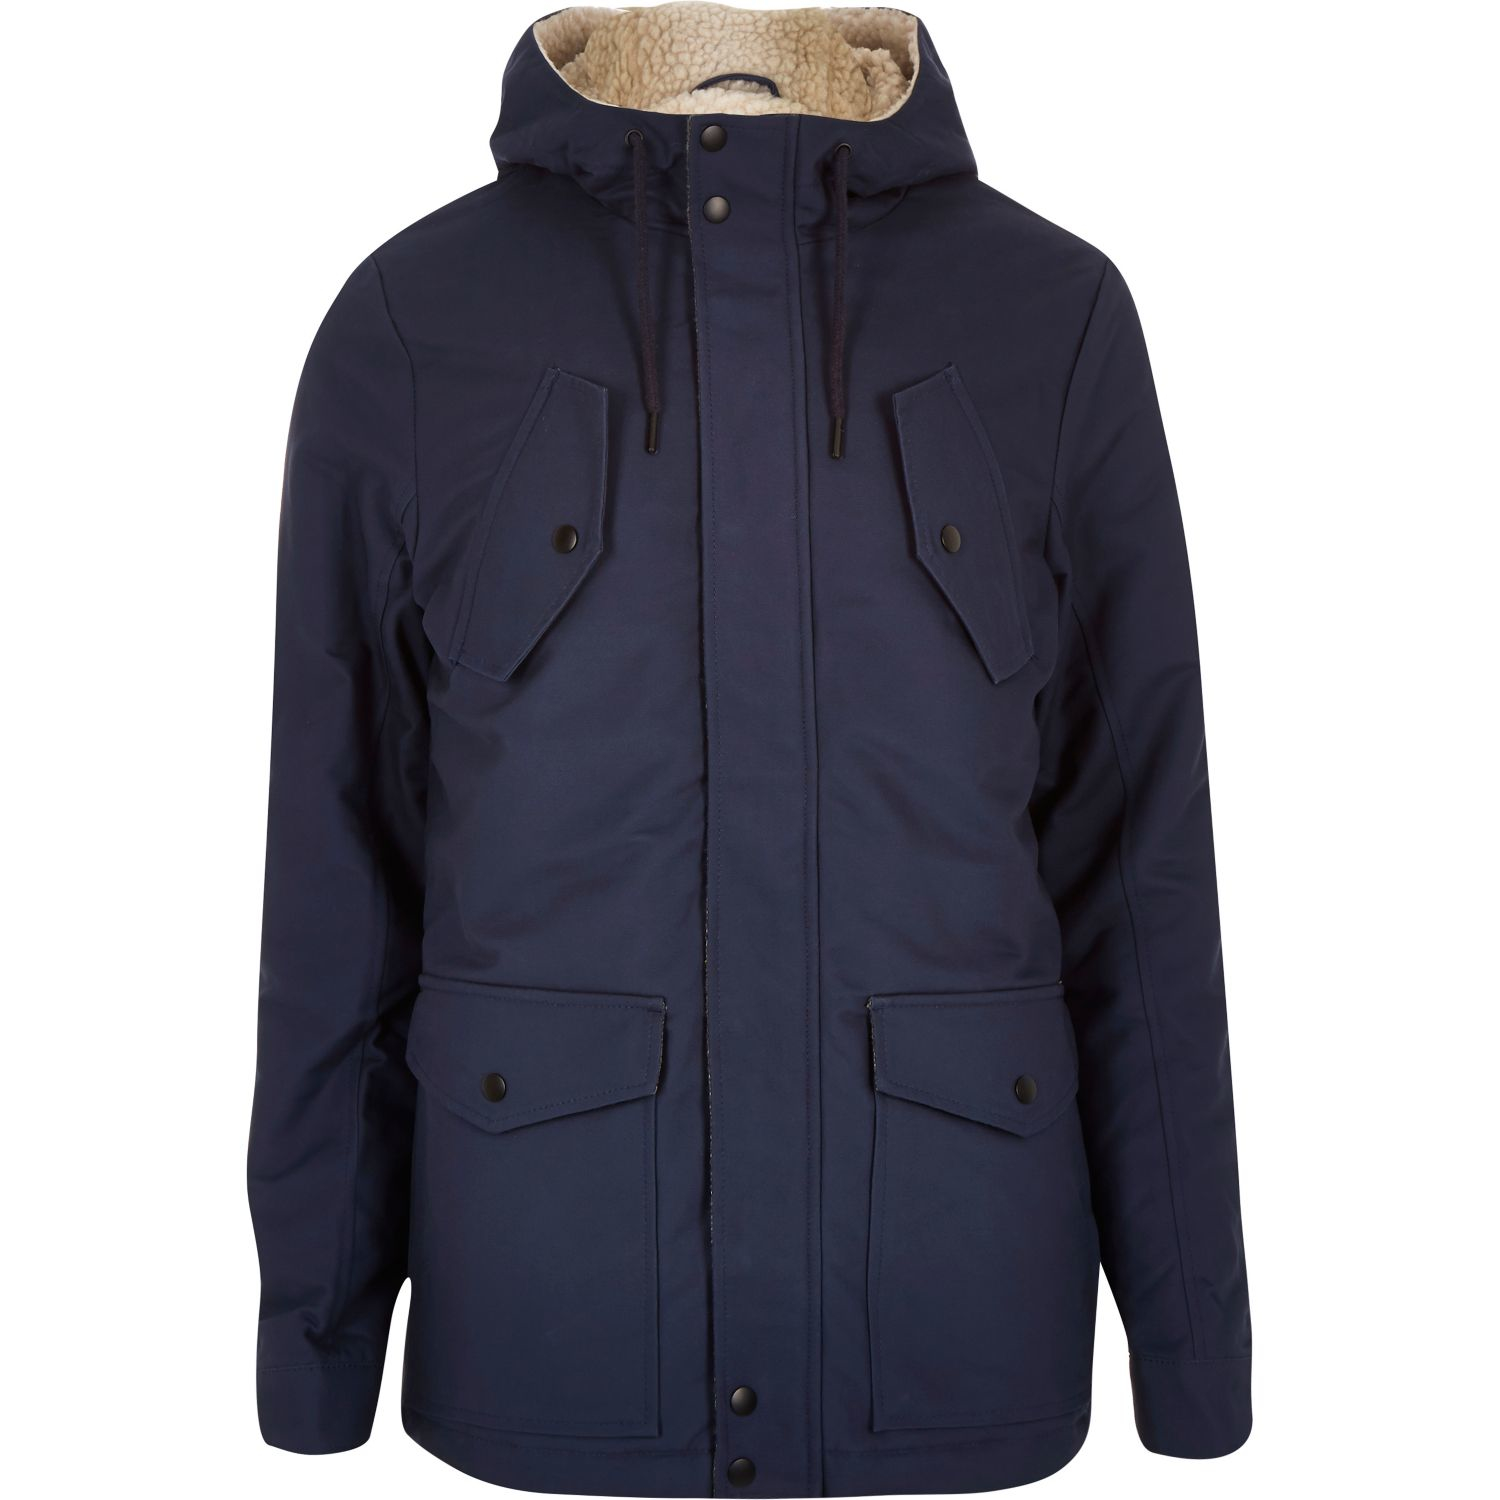 Lyst - River island Navy Borg Lined Winter Coat in Blue for Men